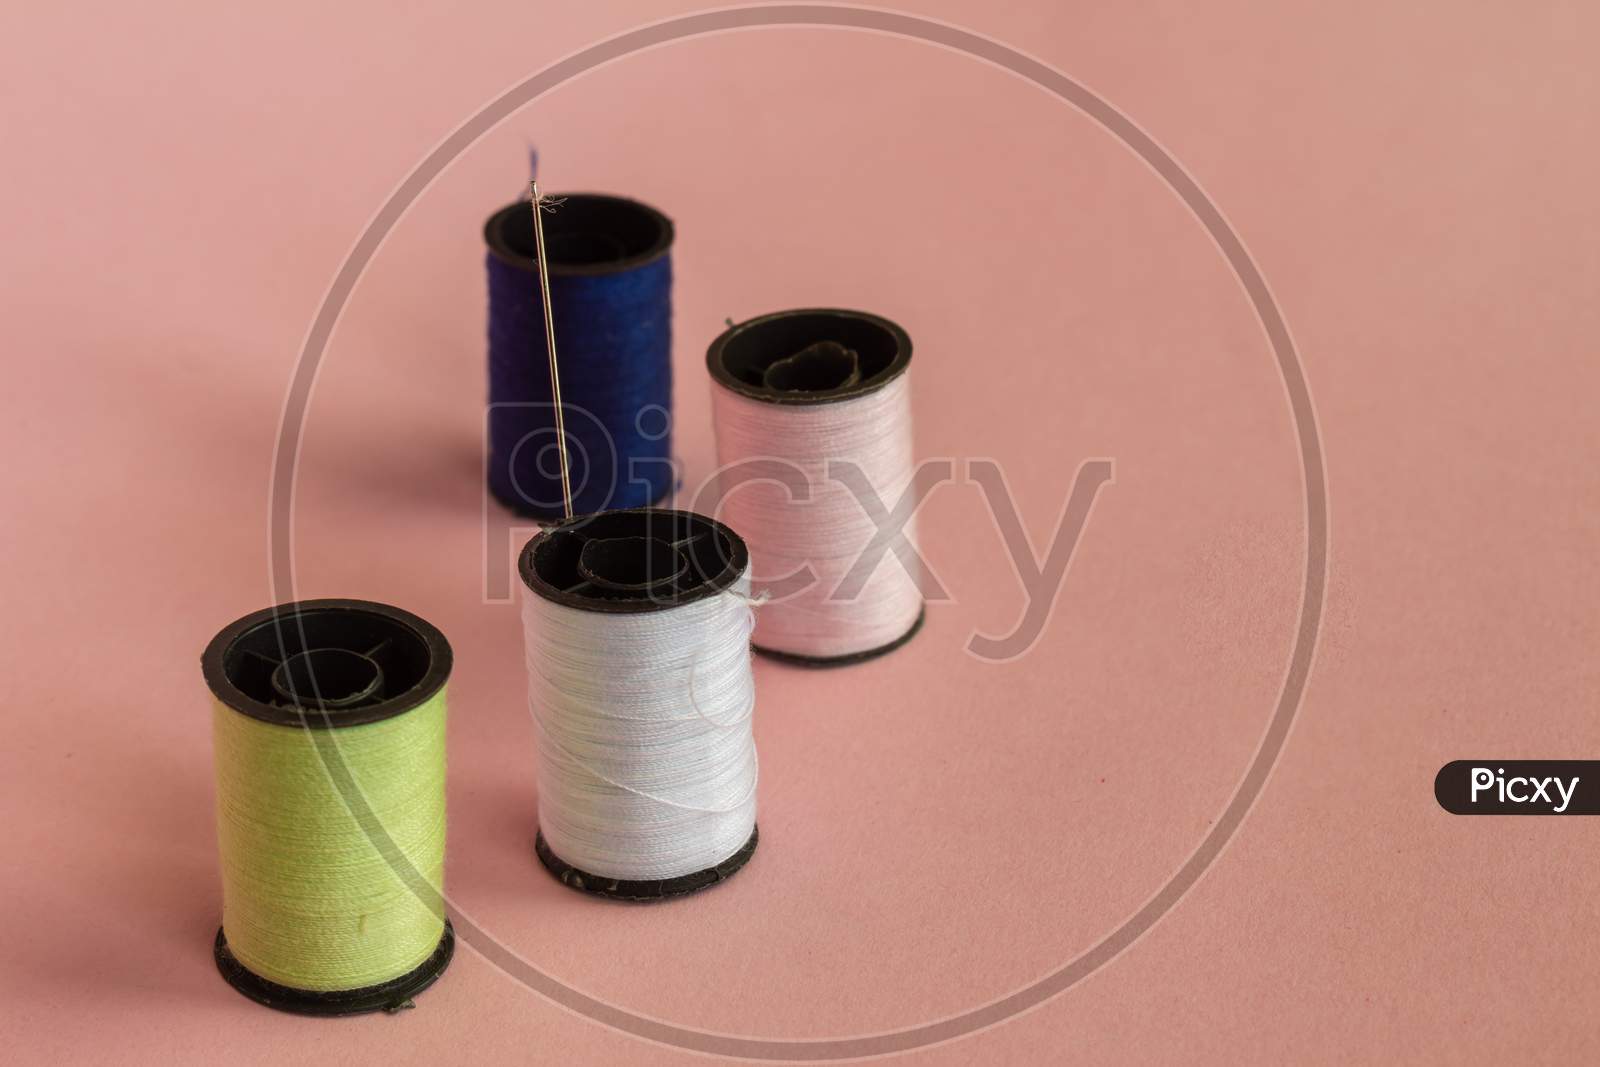 Spools With Colored Threads For Sewing. Elements Of A Sewing Workshop On A Neutral Pink Background.